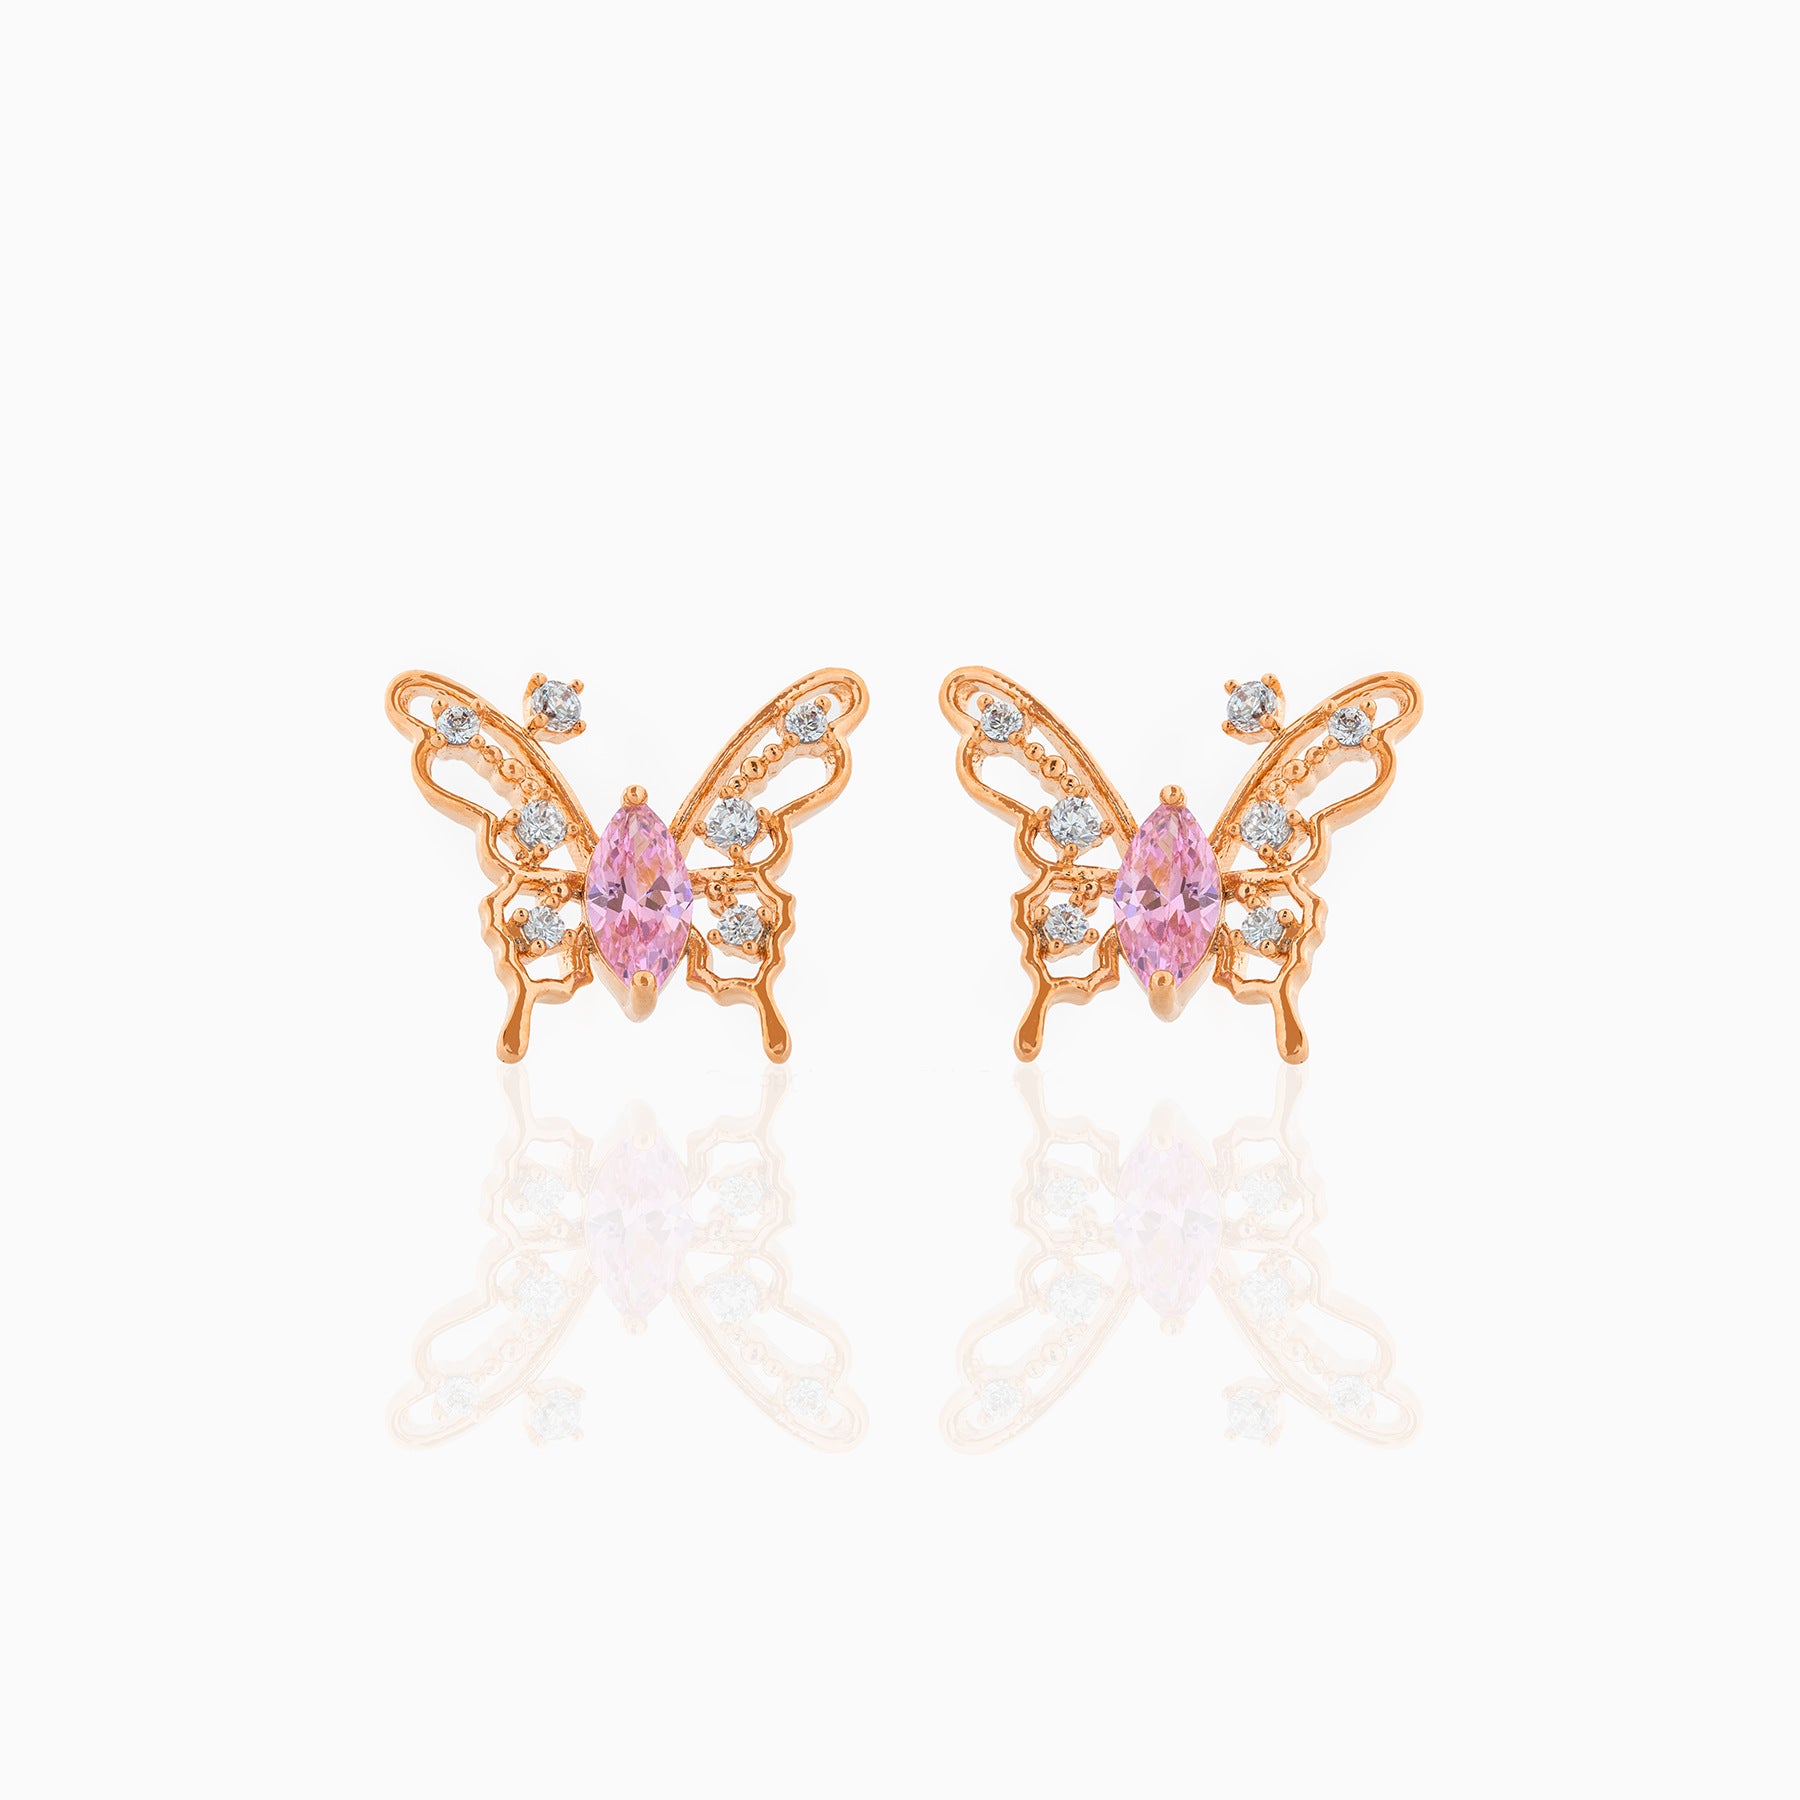 A pair of Micro Inlaid Zircon Silver Stud Earrings by Maramalive™ on a white background.